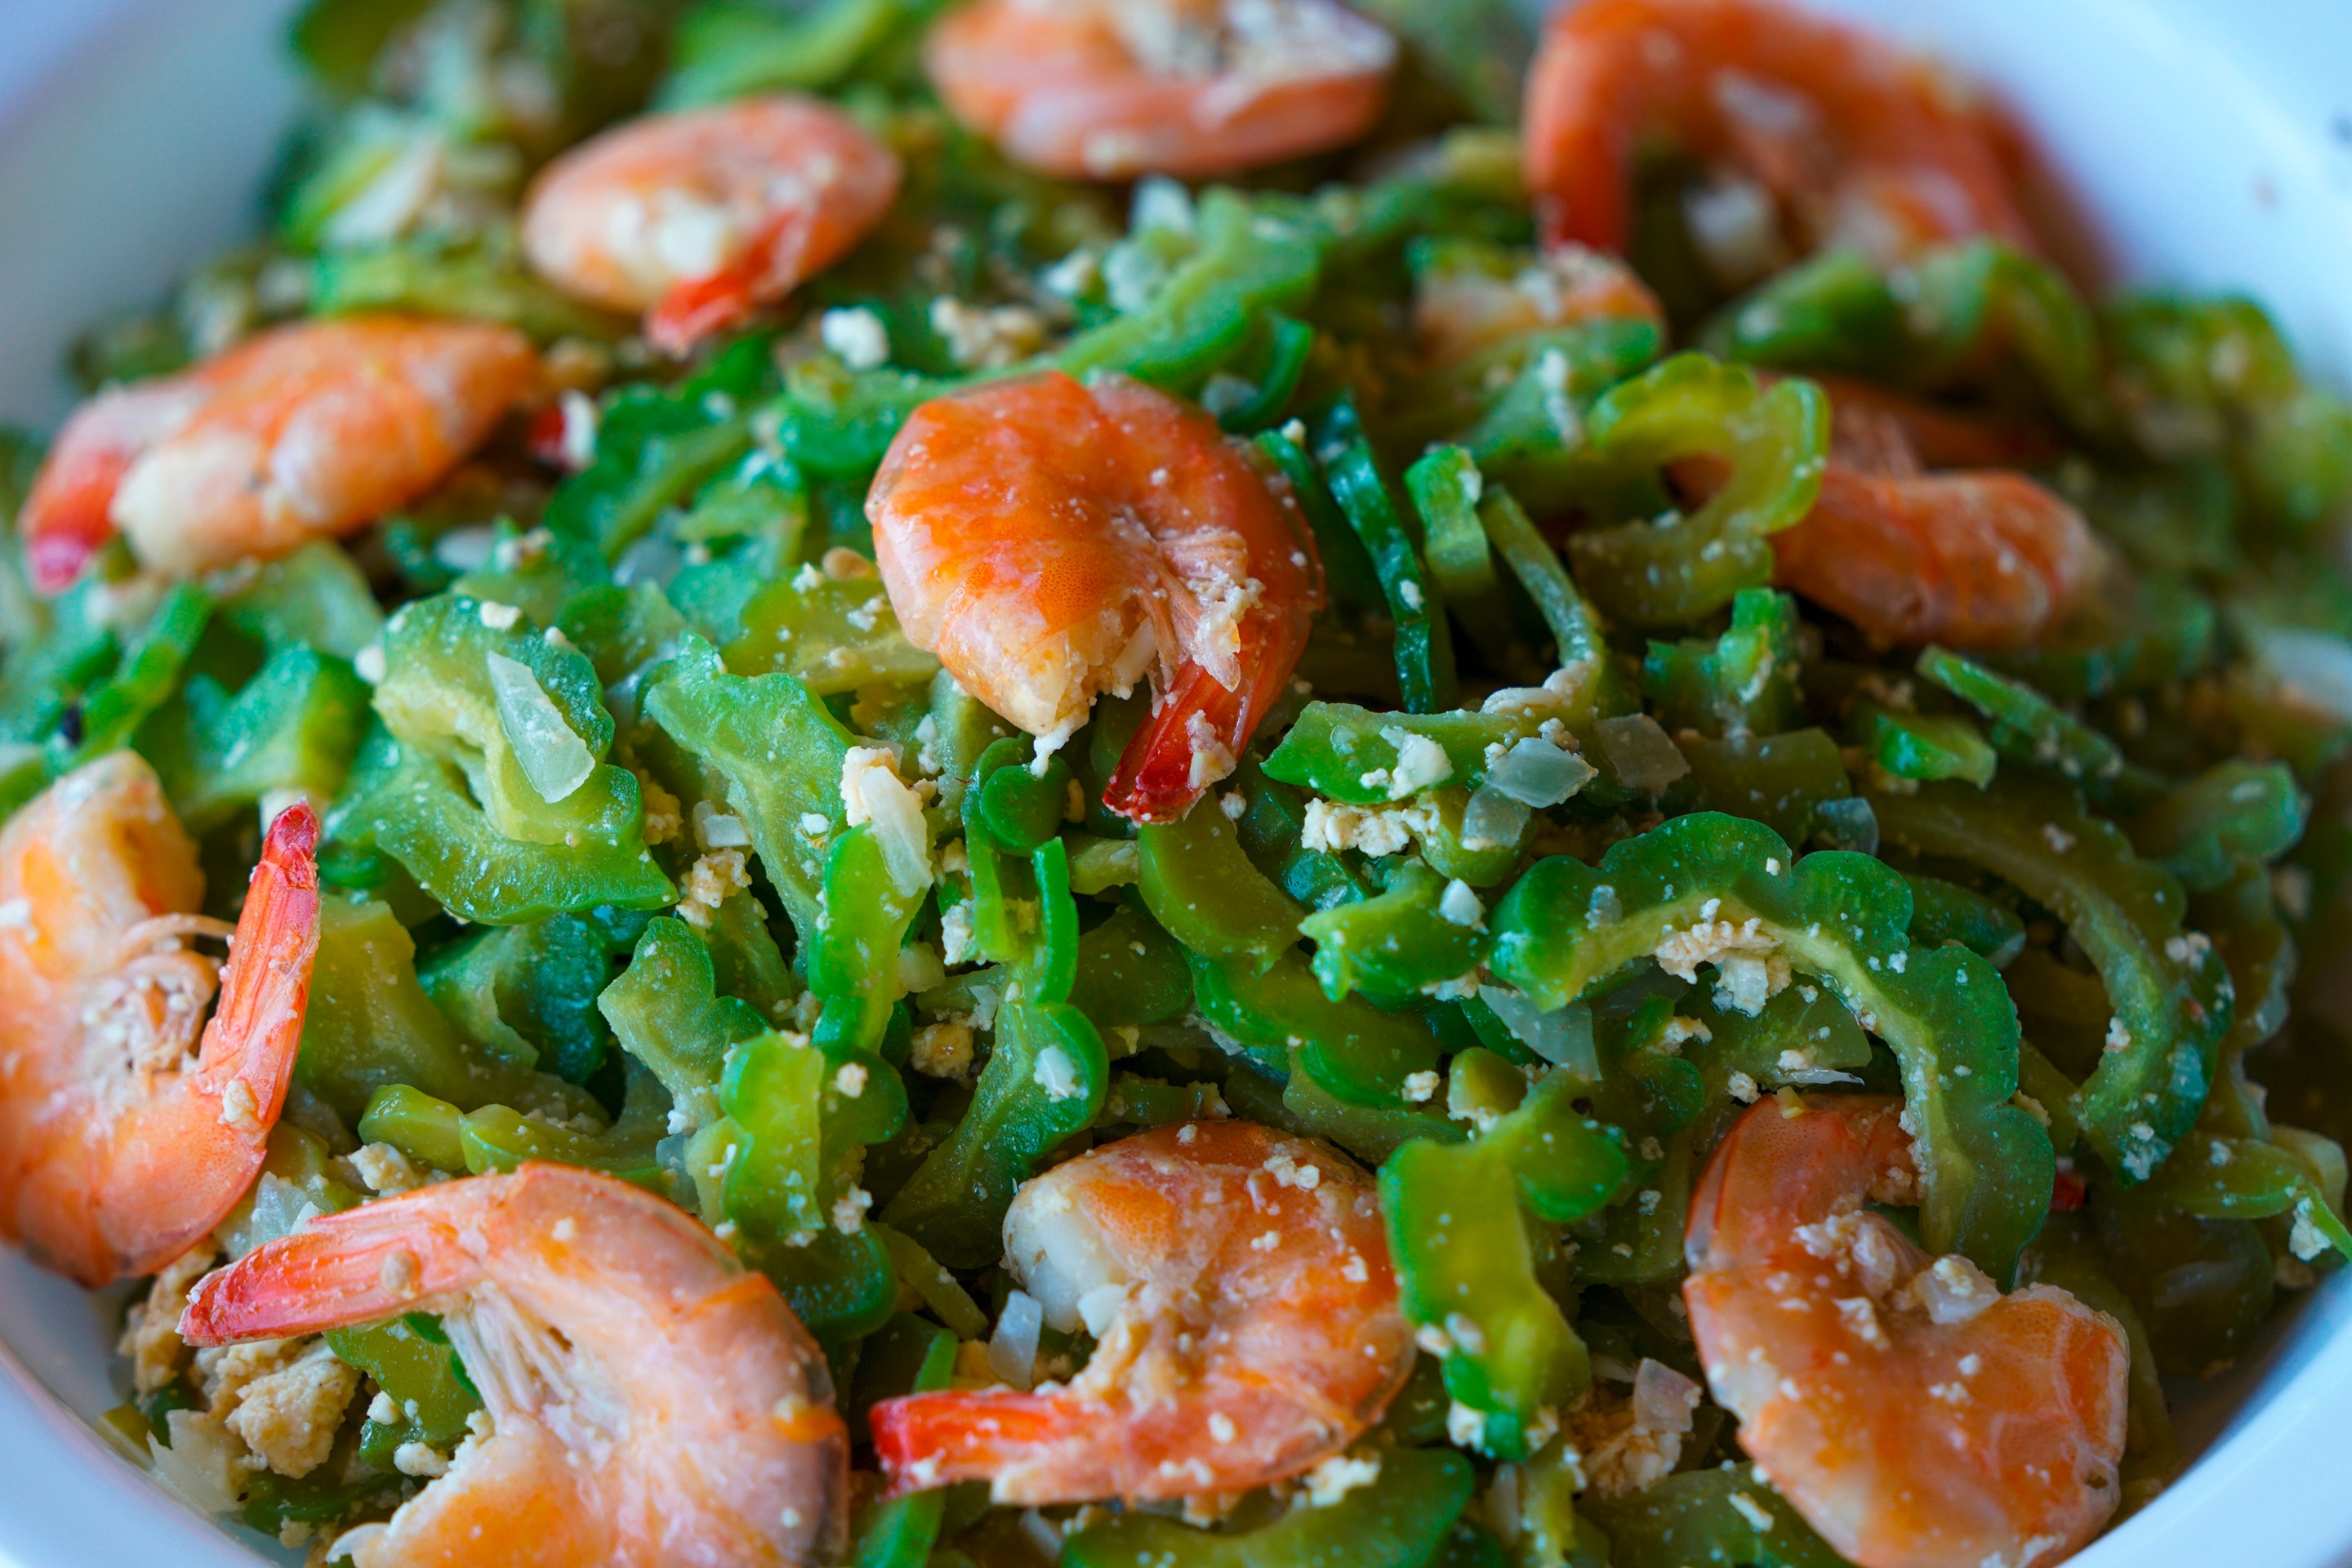 A serving of ginisang ampalaya with shrimp